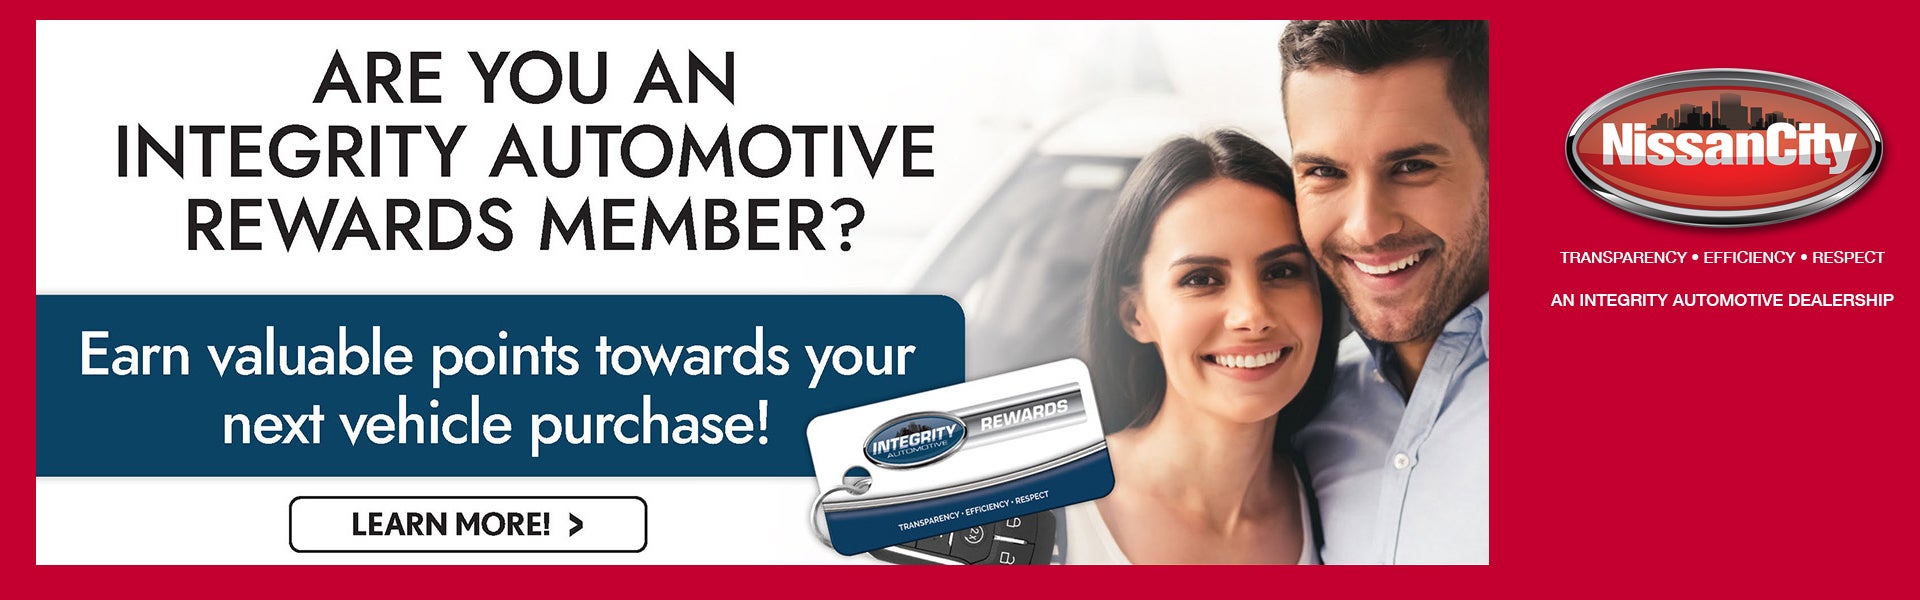 Are you an intergrity automotive rewards memeber? Click here to learn more